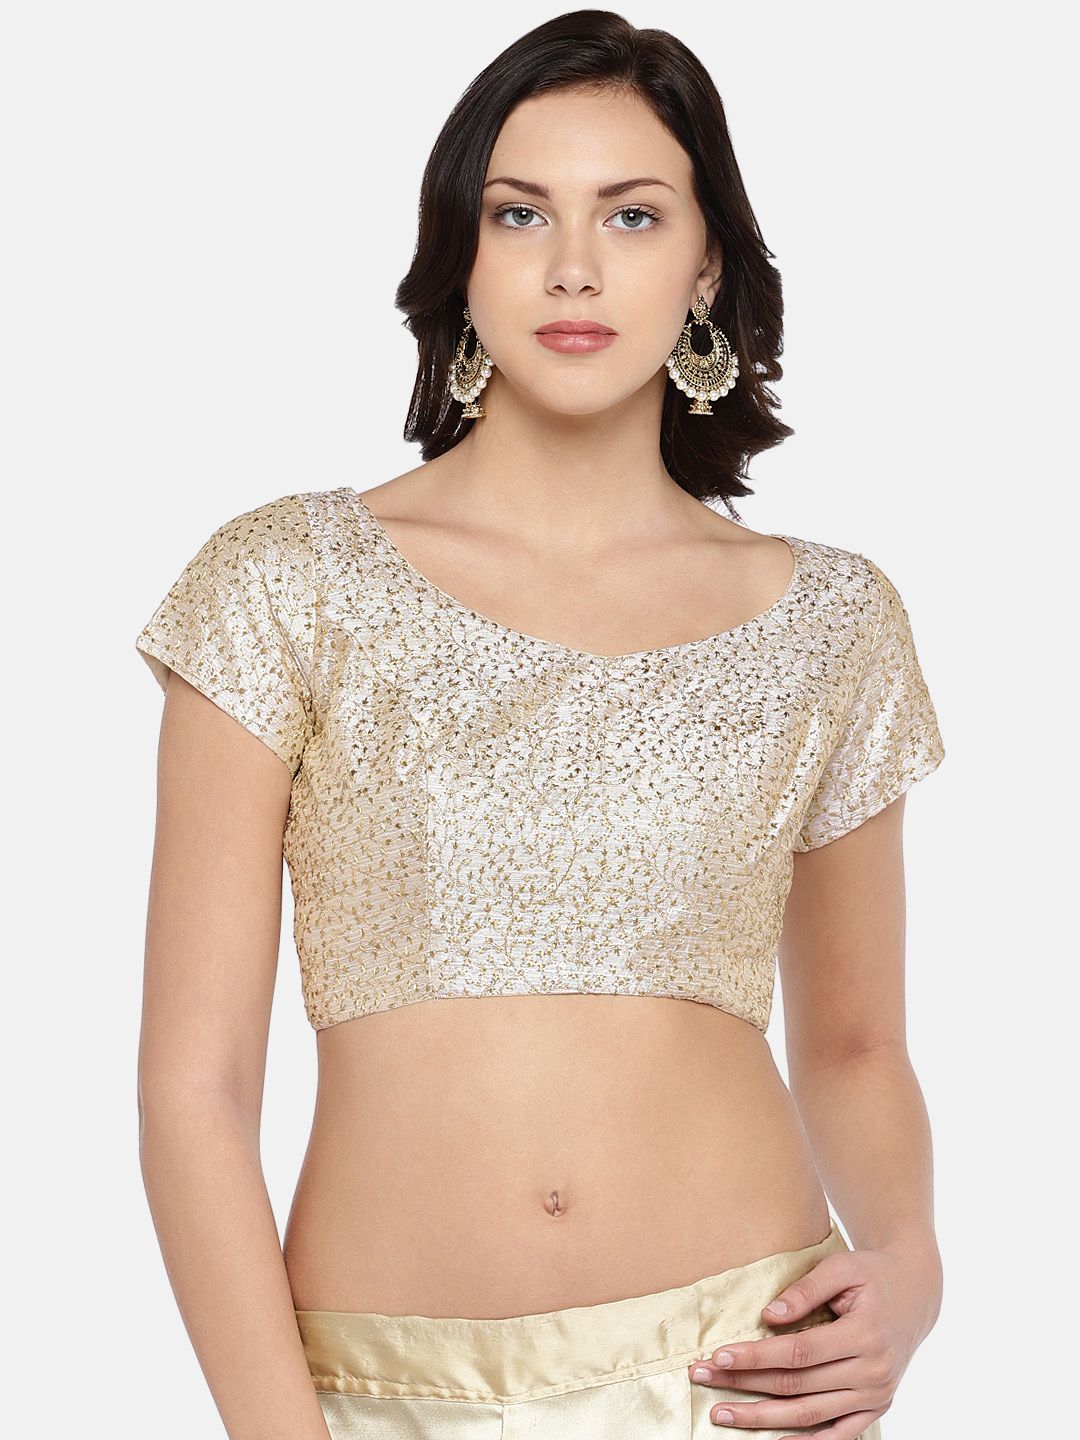 Studio Shringaar Women's Beige And Gold Embroidered Saree Blouse Price in India